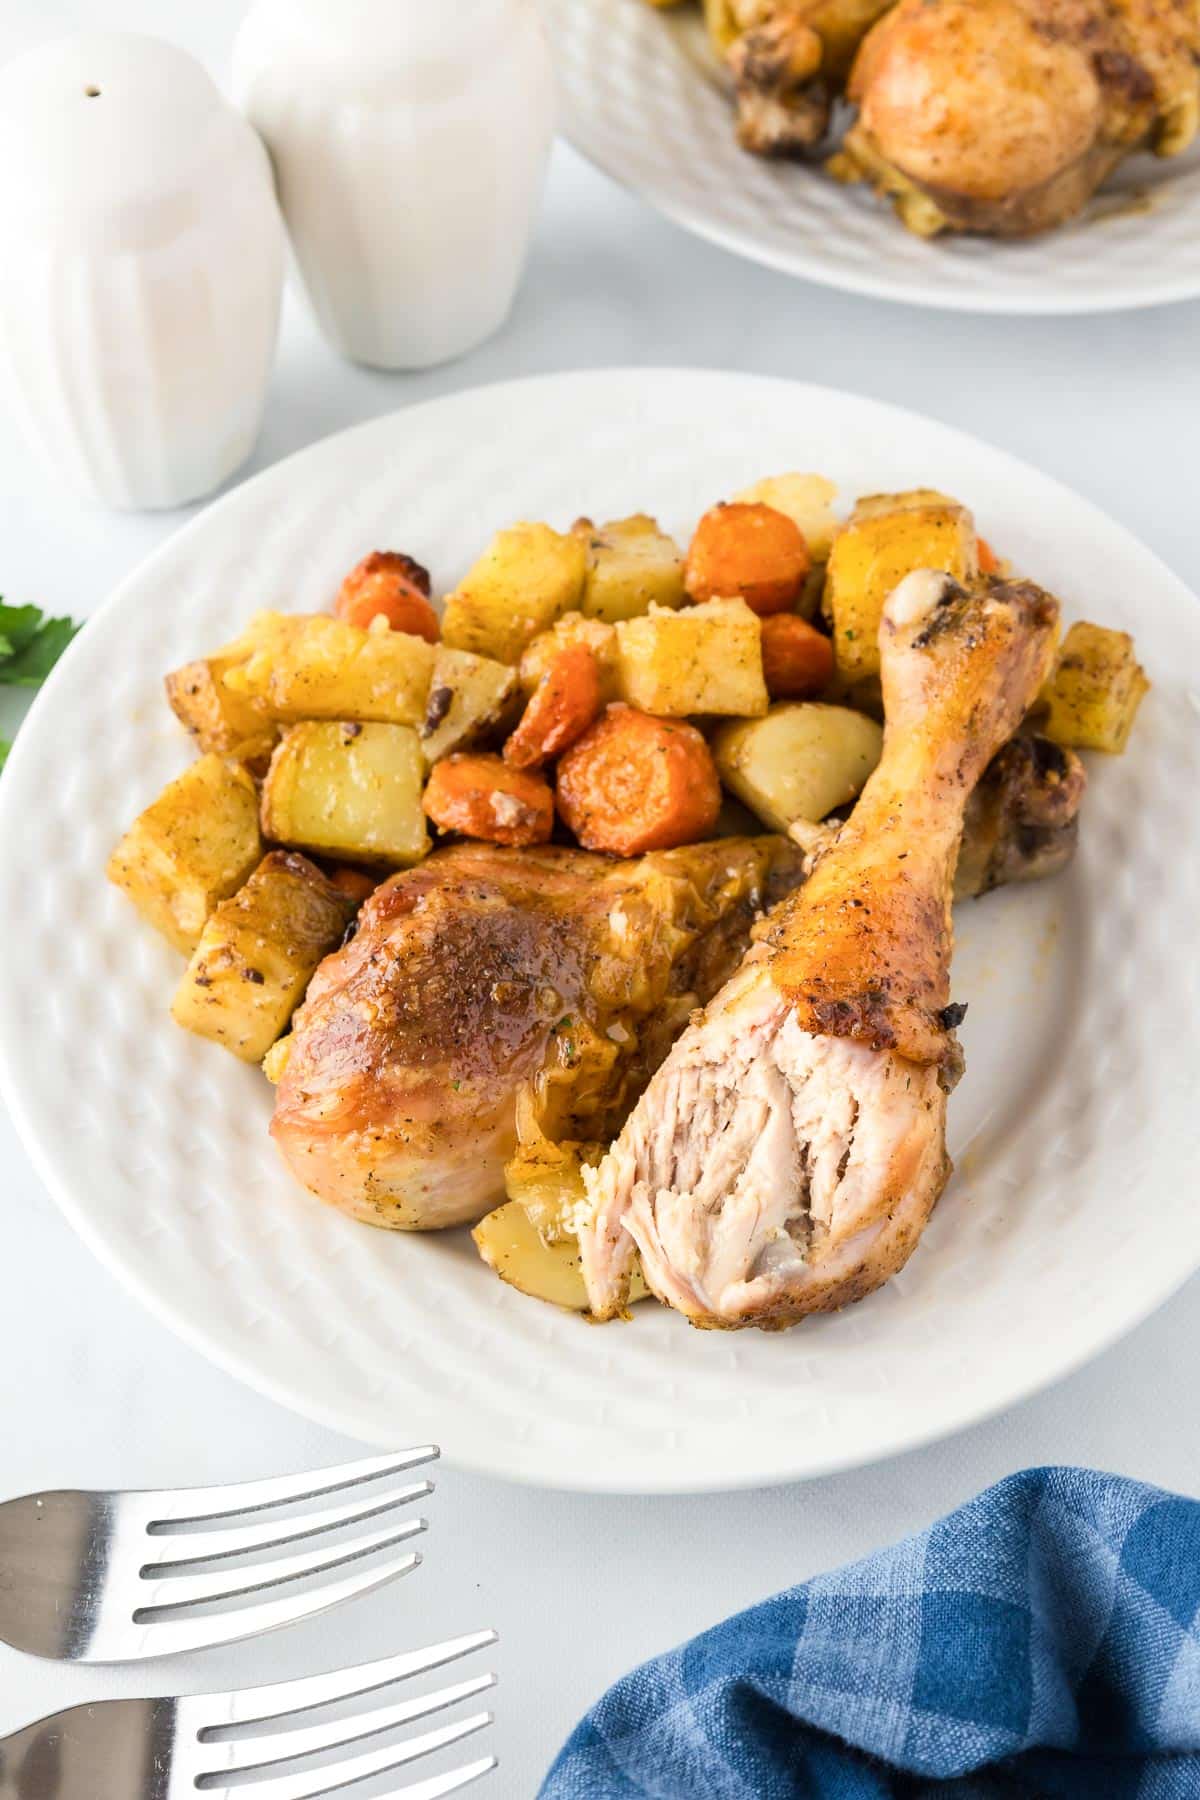 A plate with two roasted chicken legs, one missing a bite, roasted potatoes and carrots on a plate on a dinner table.